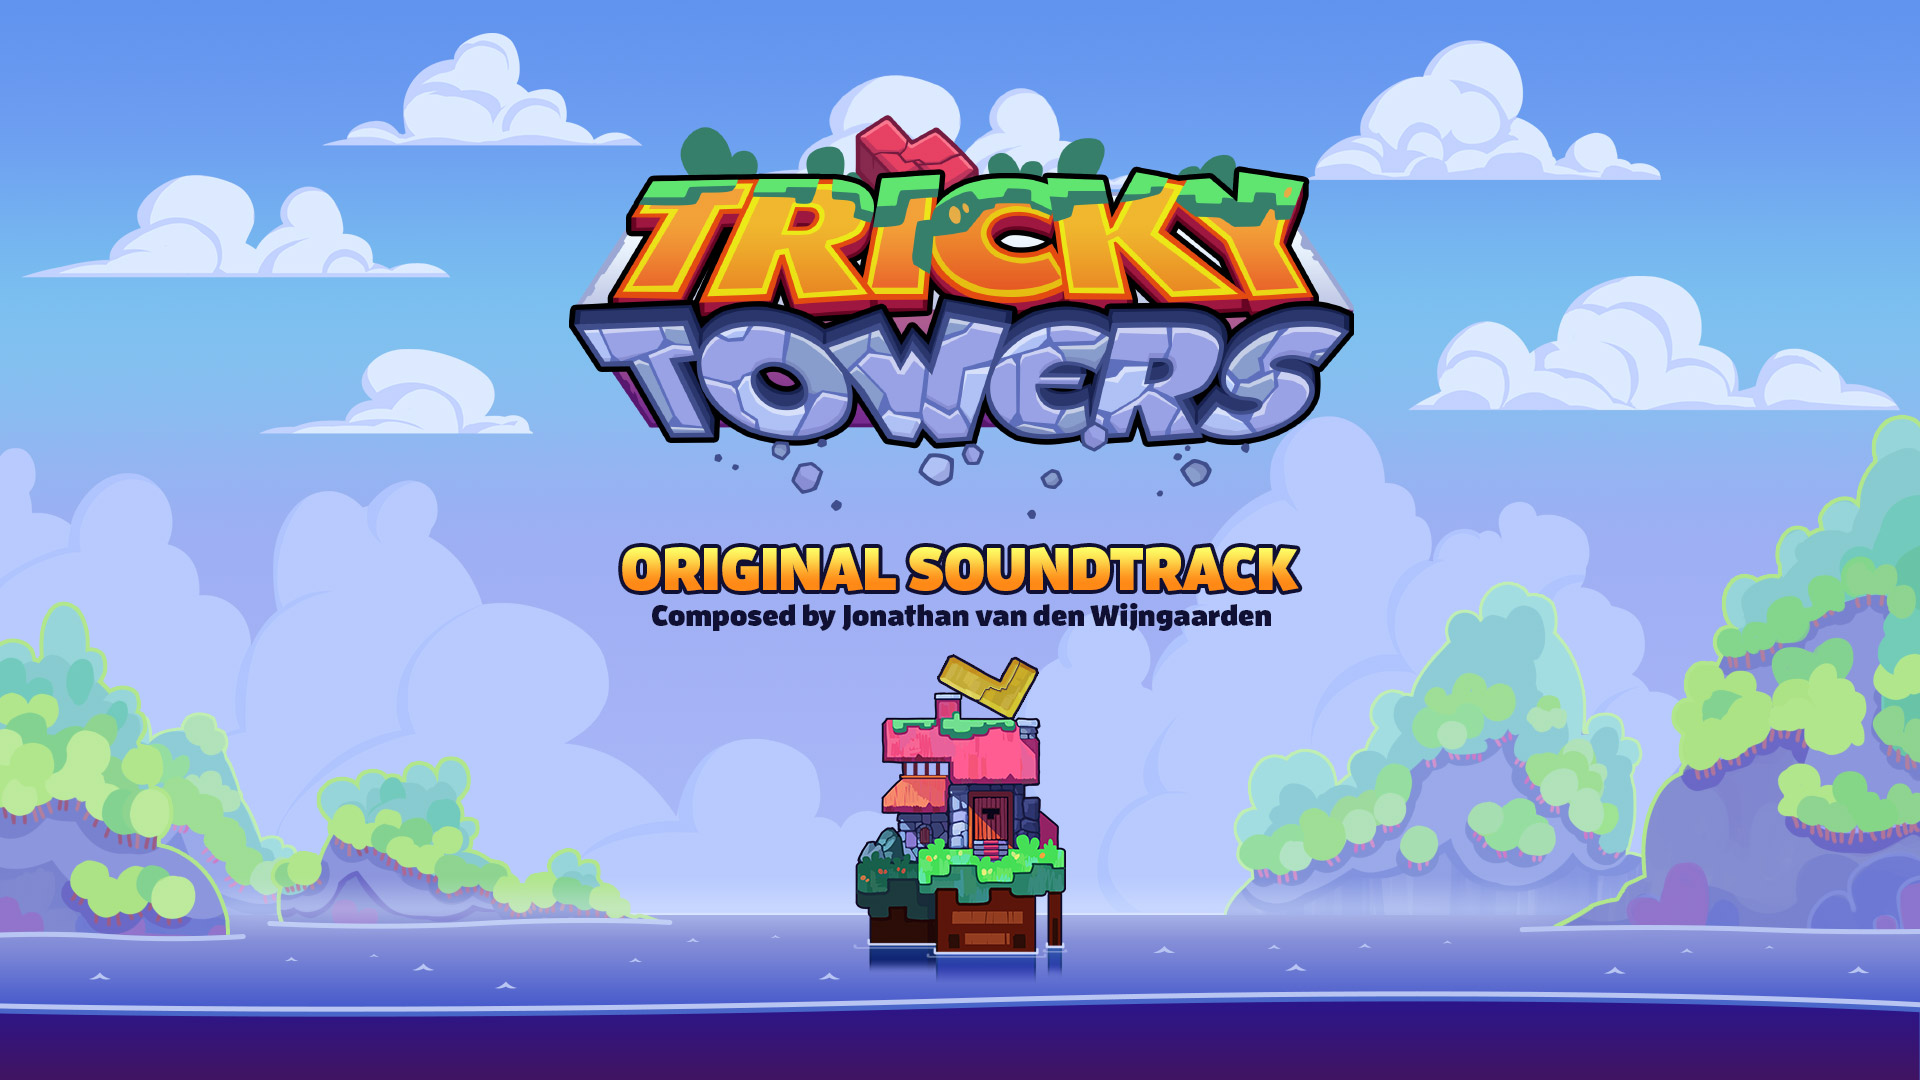 Tricky Towers - Original Soundtrack Featured Screenshot #1